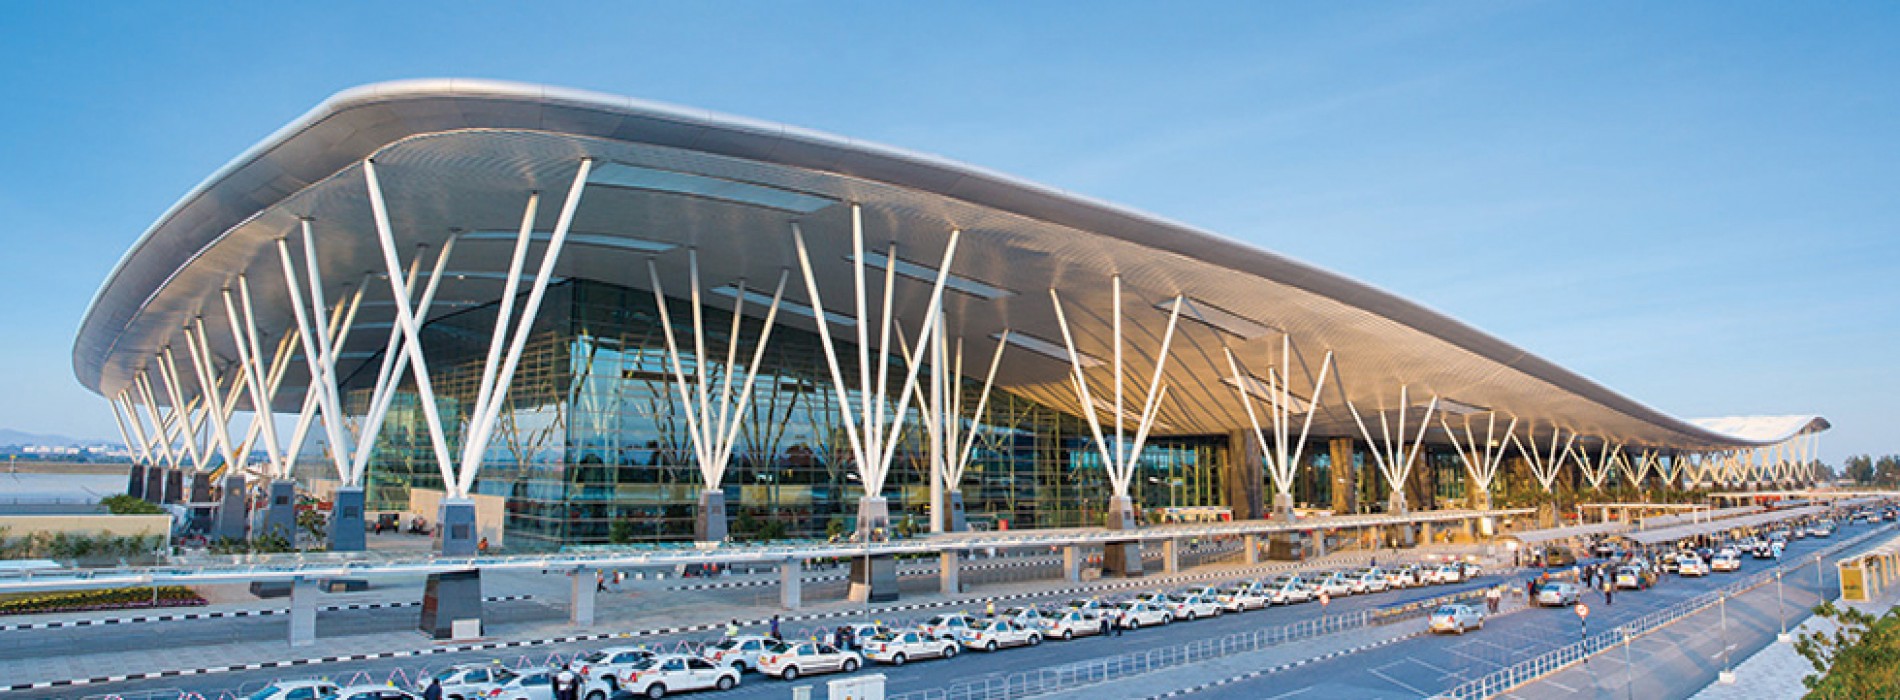 Bengaluru Airport will be closed for 6 hours every day between February 19 and April 30